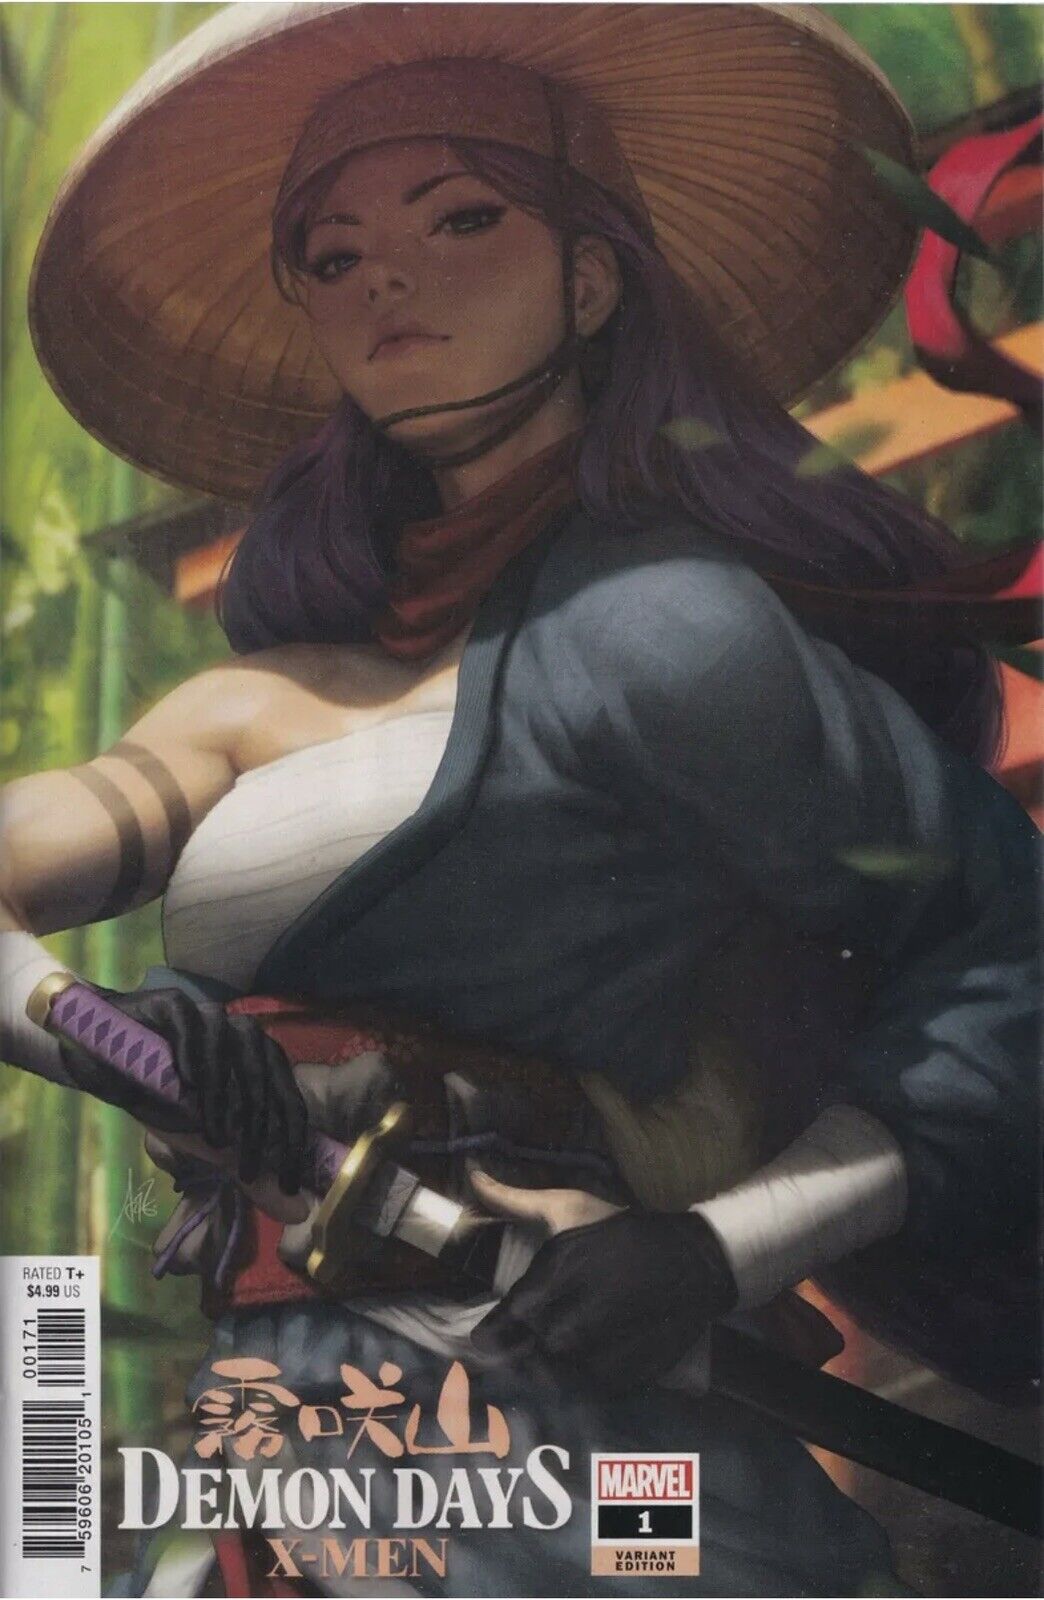 DEMON DAYS: X-MEN #1 ARTGERM VARIANT NM COMBINED SHIPPING AVAILABLE